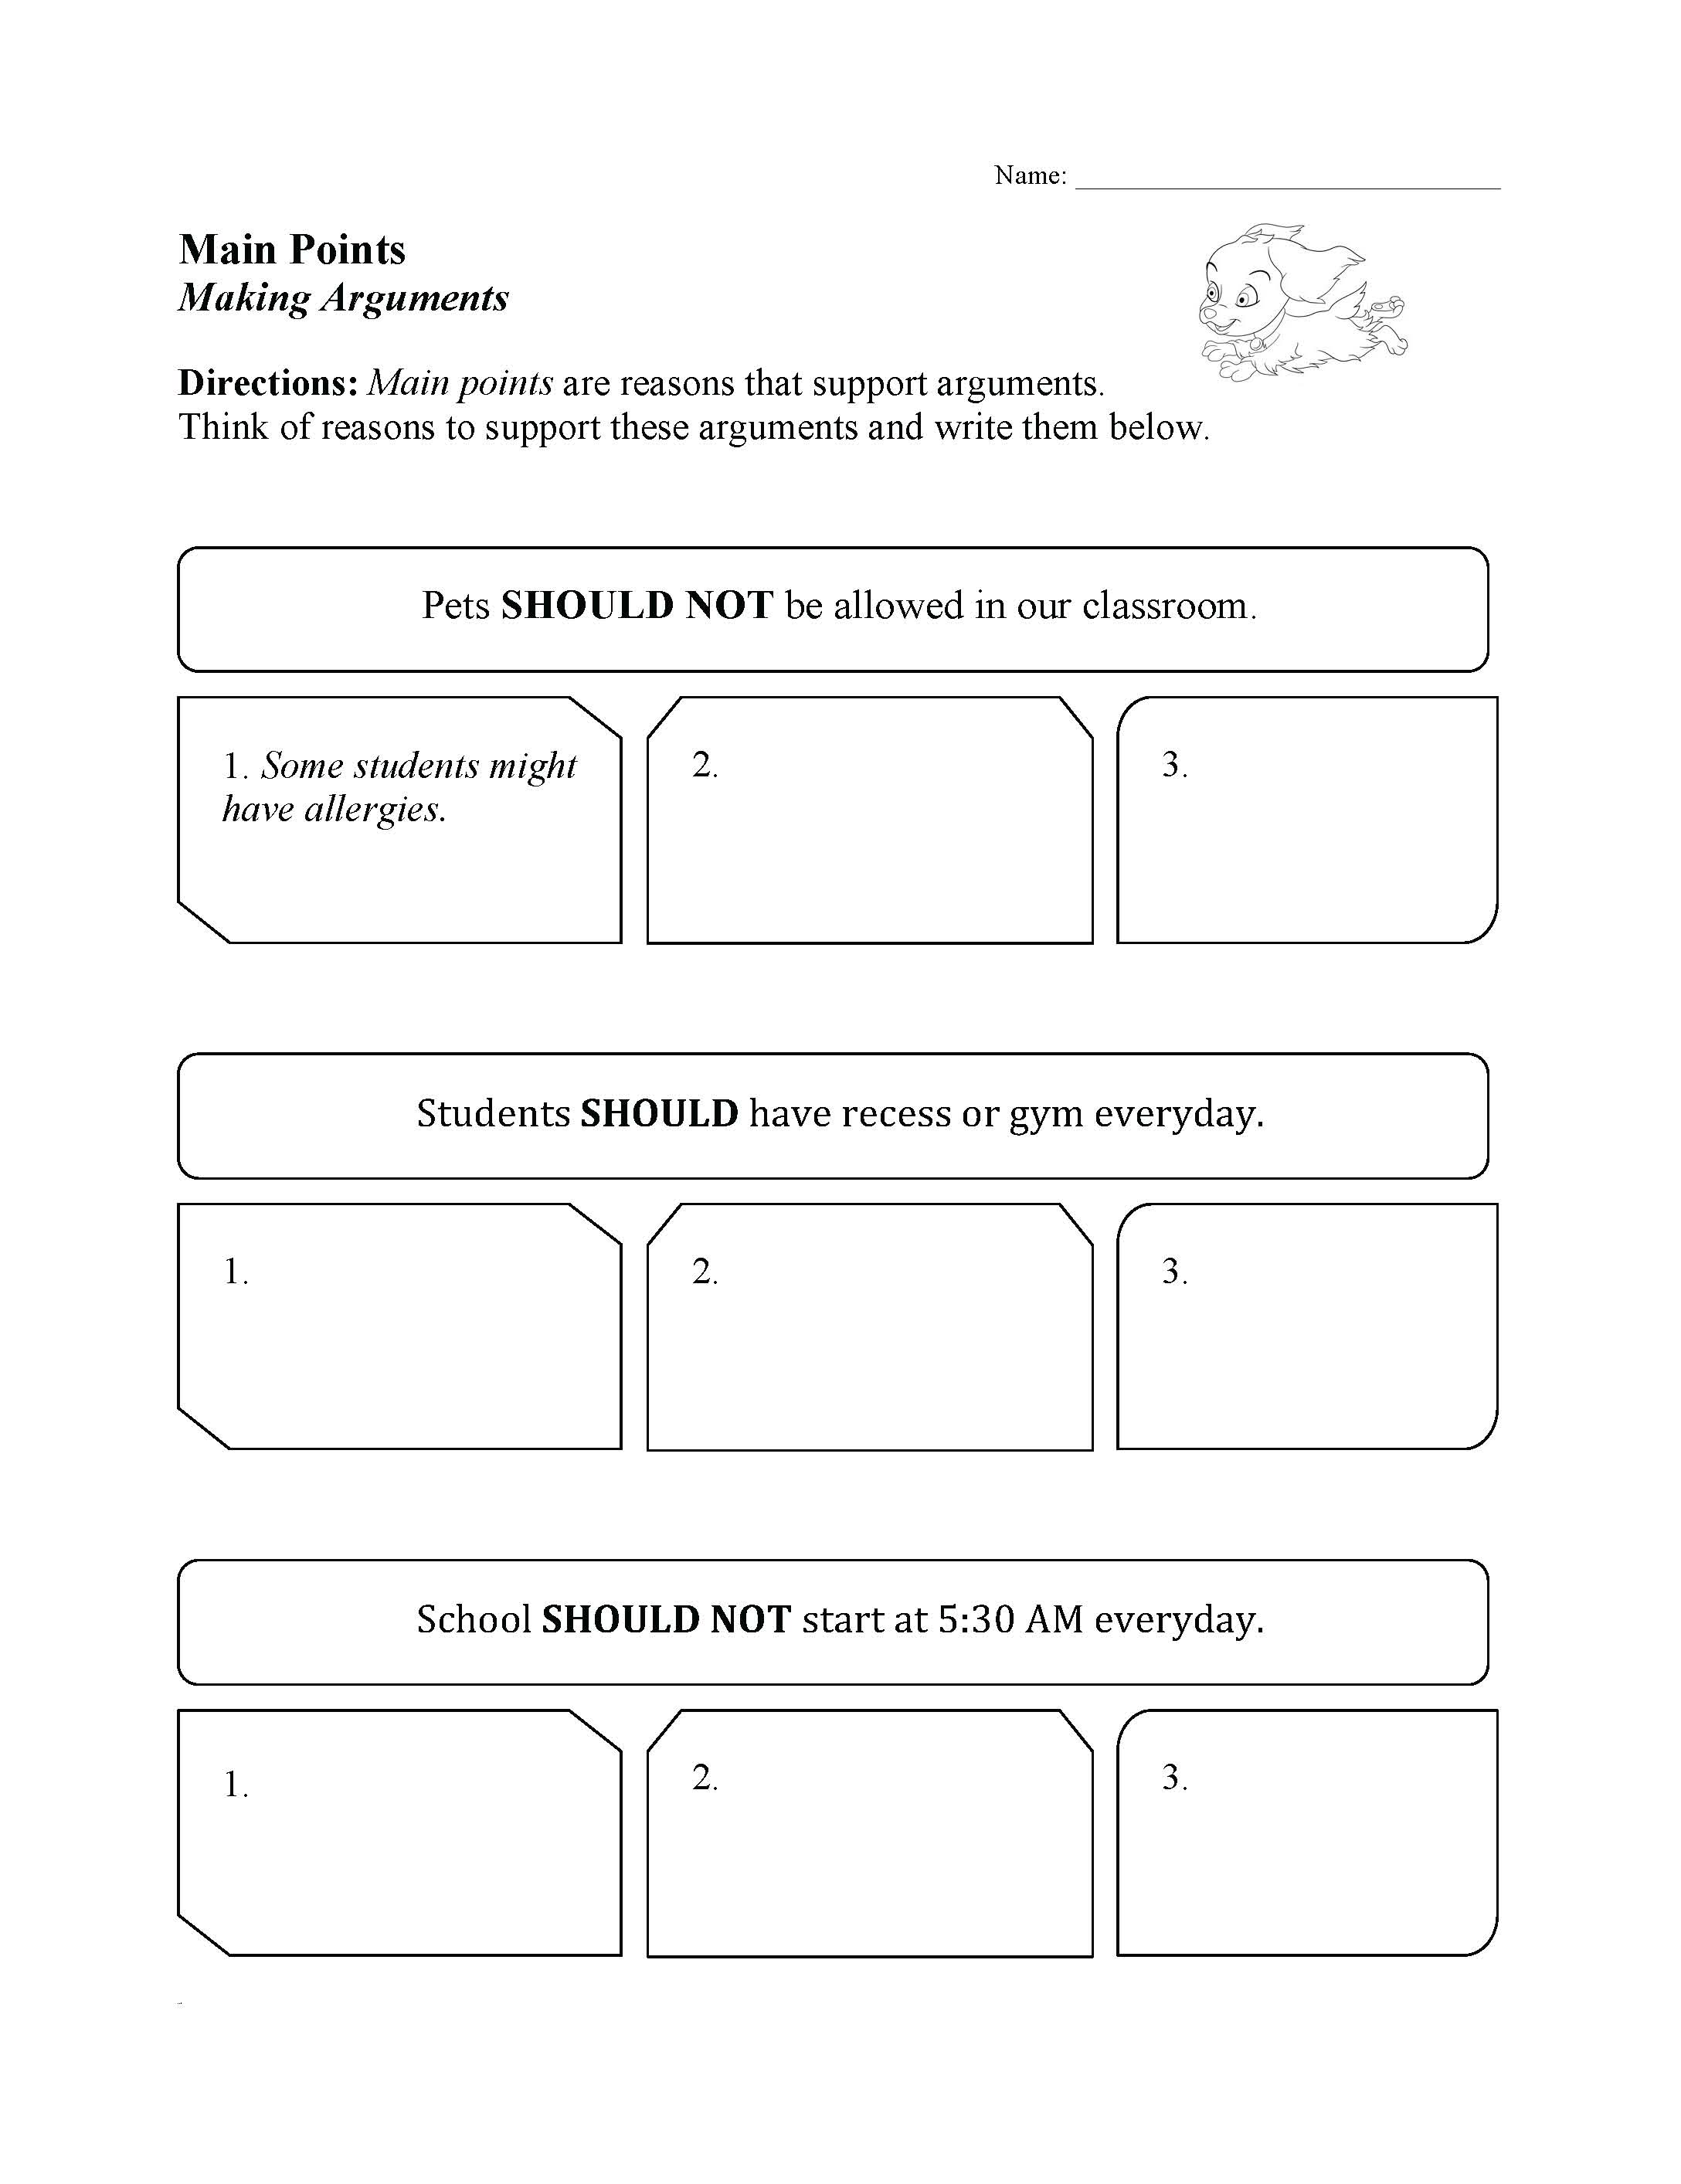 This is a preview image of our Main Points Worksheet. Click on it to enlarge this image and view the source file.